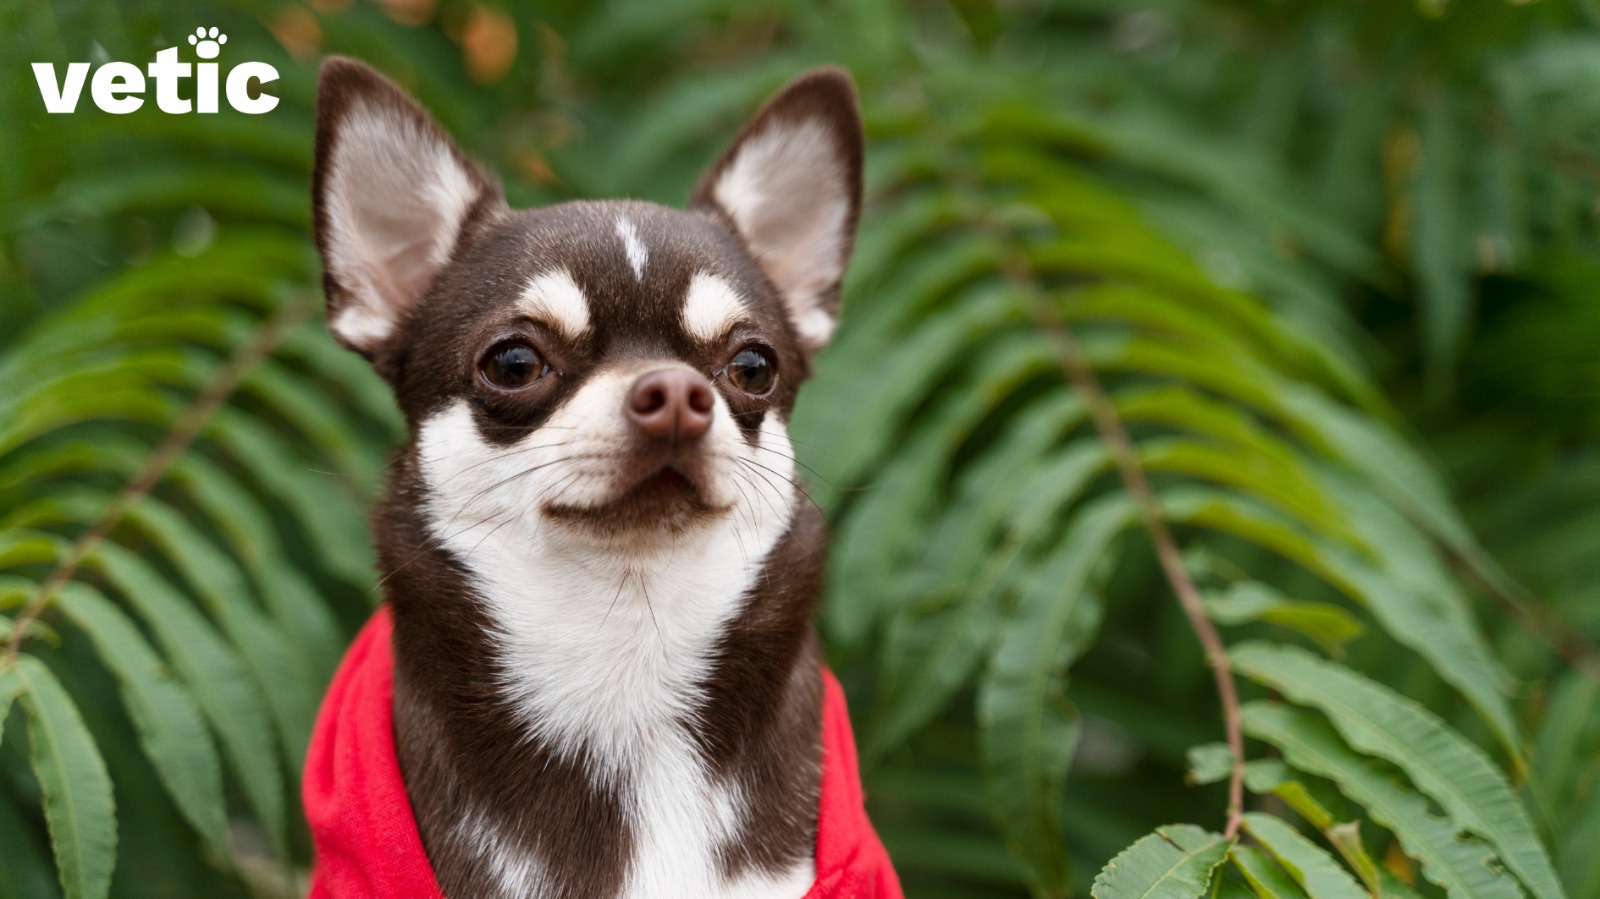 A brown and white chihuahua breed adult dog. has distinct "eyebrow" marks with a white muzzle and inner years. the brown markings make it look like they are wearing a brown mask. they have a red sweatshirt on.